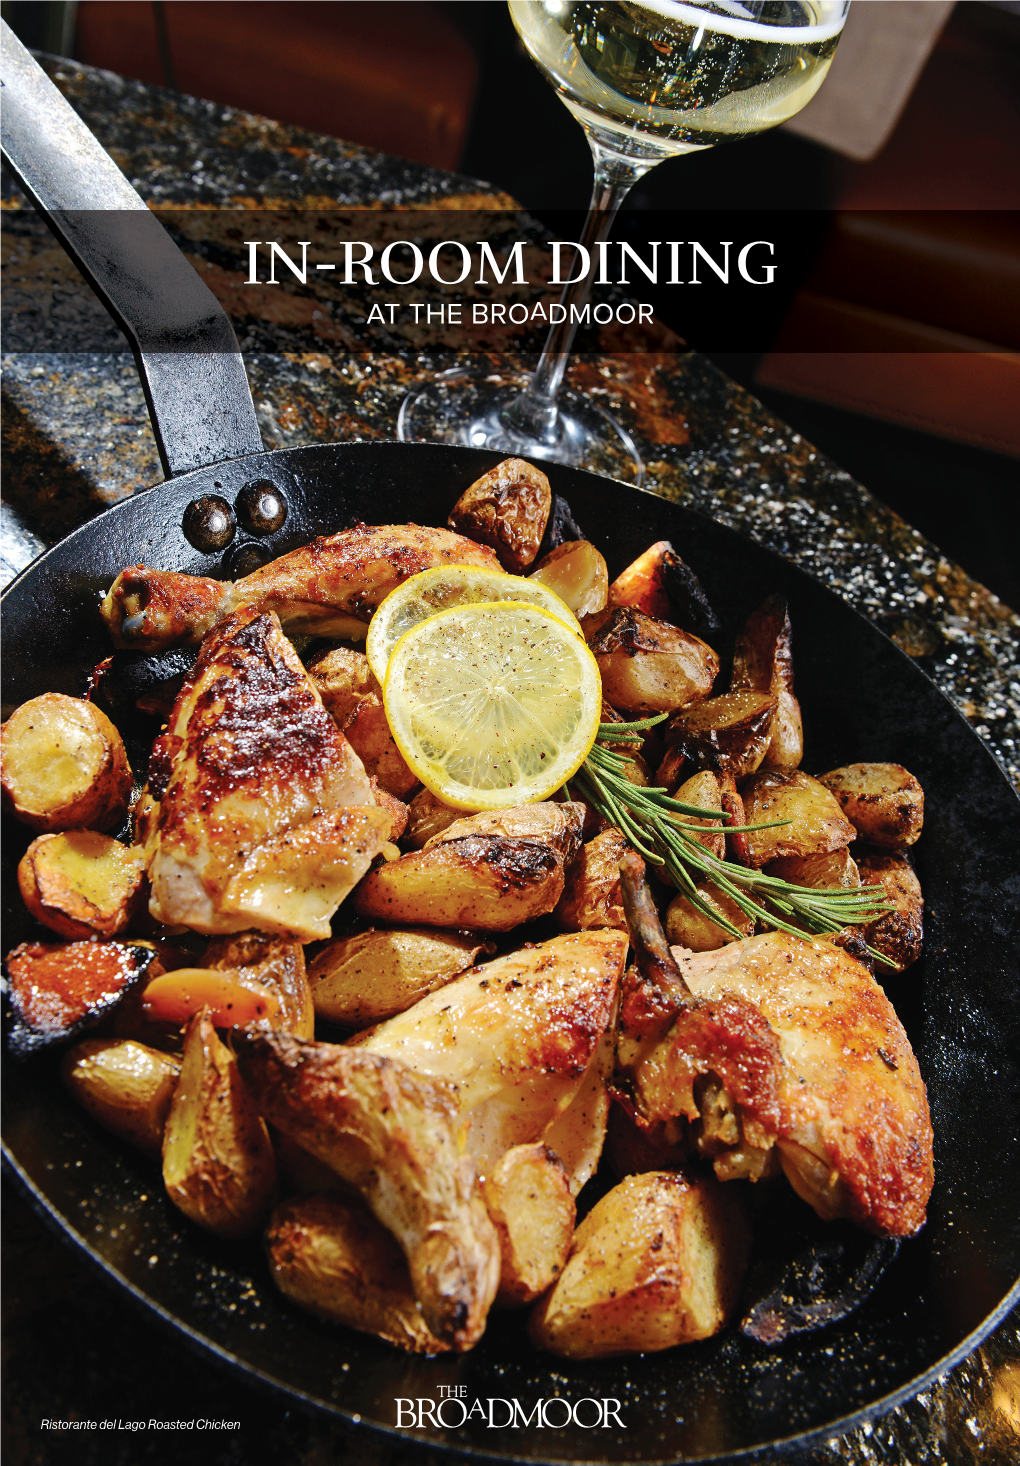 In-Room Dining at the Broadmoor